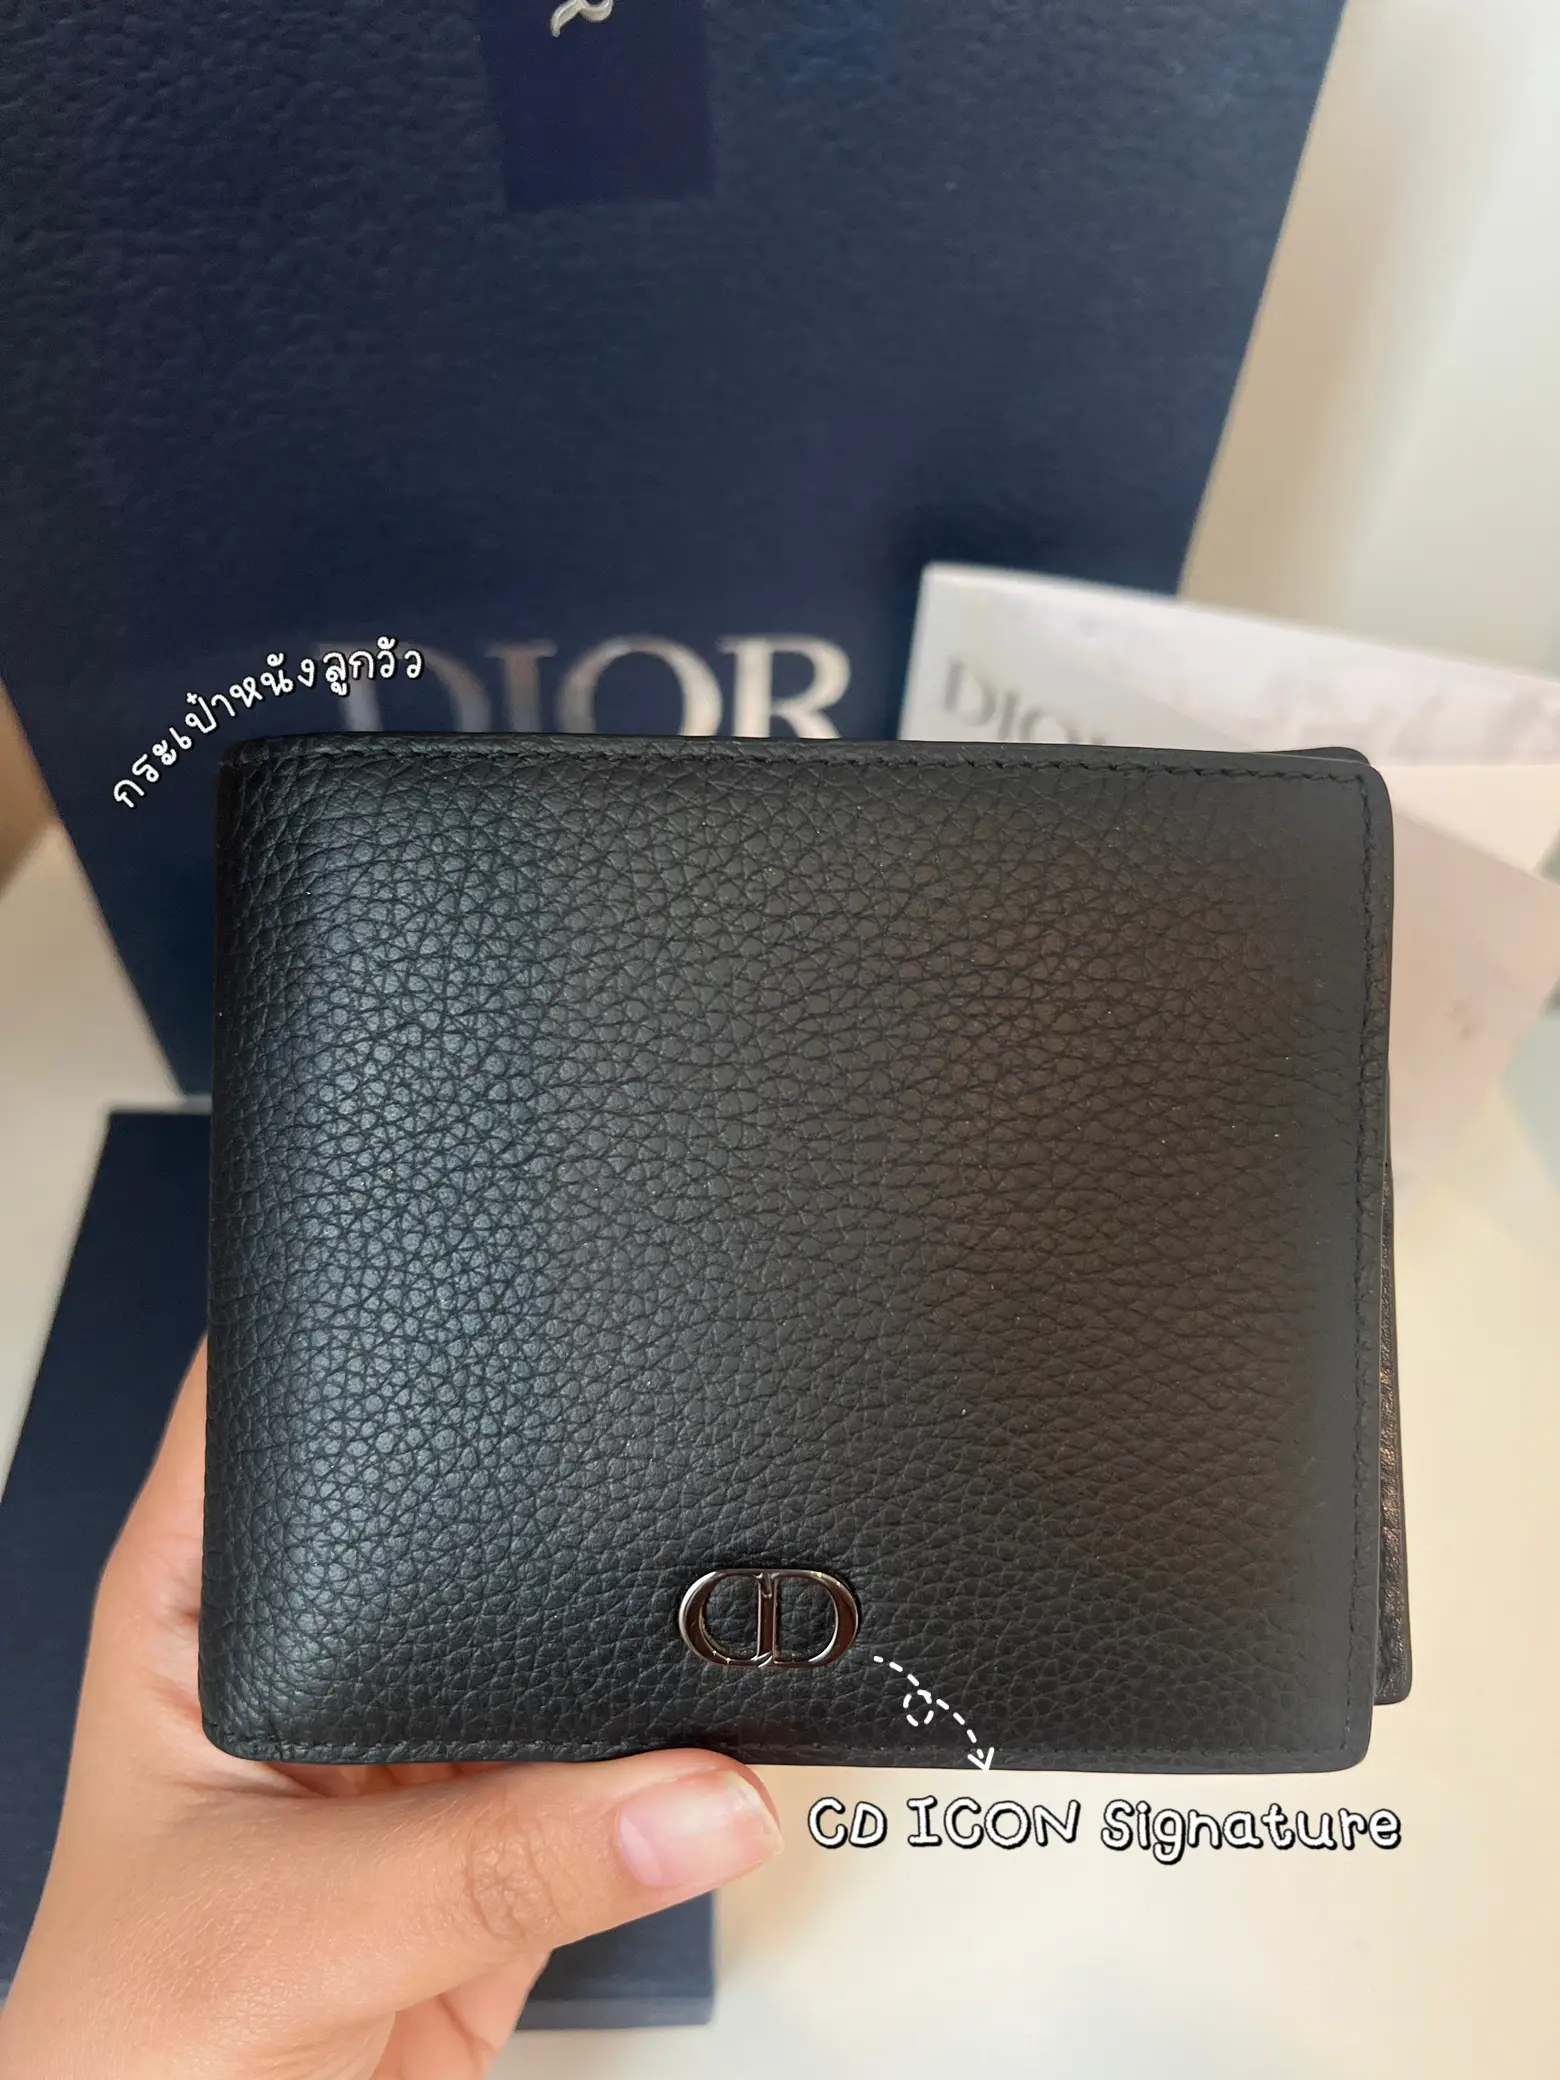 Dior - Compact Wallet Black Grained Calfskin with CD Icon Signature - Men - Gift Ideas for Him